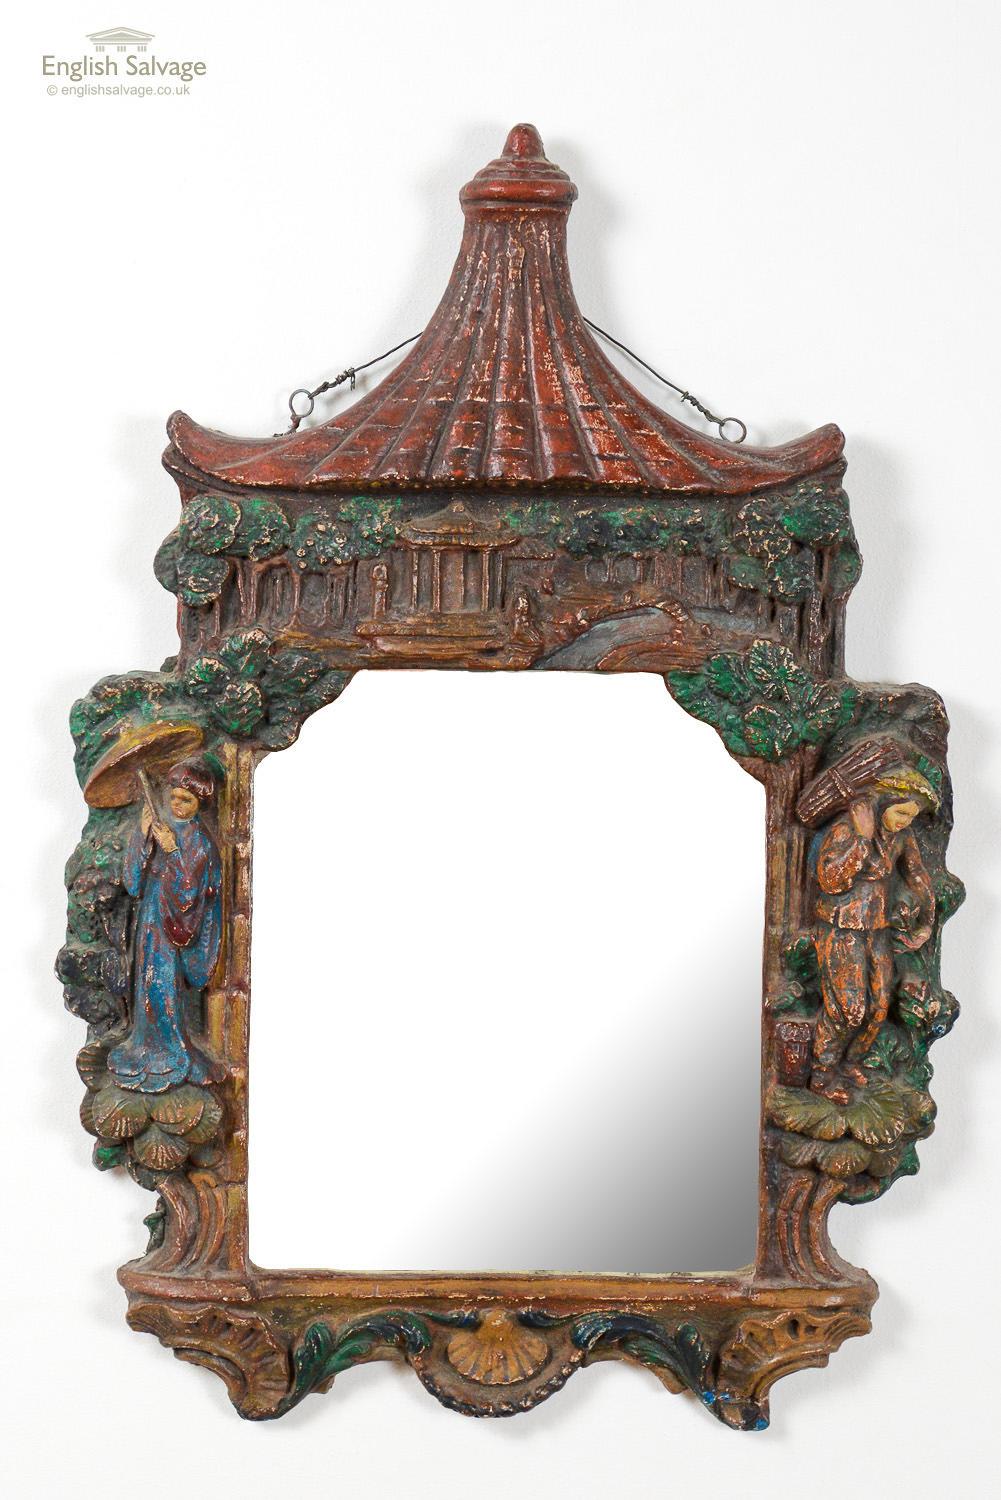 Charming antique Chinese-style gesso mirror. It features a scalloped and floral edging with a figure either side of the mirror and a pagoda at the top. The painting is exquisite with the expressive faces on the figures. Paint wear has formed a